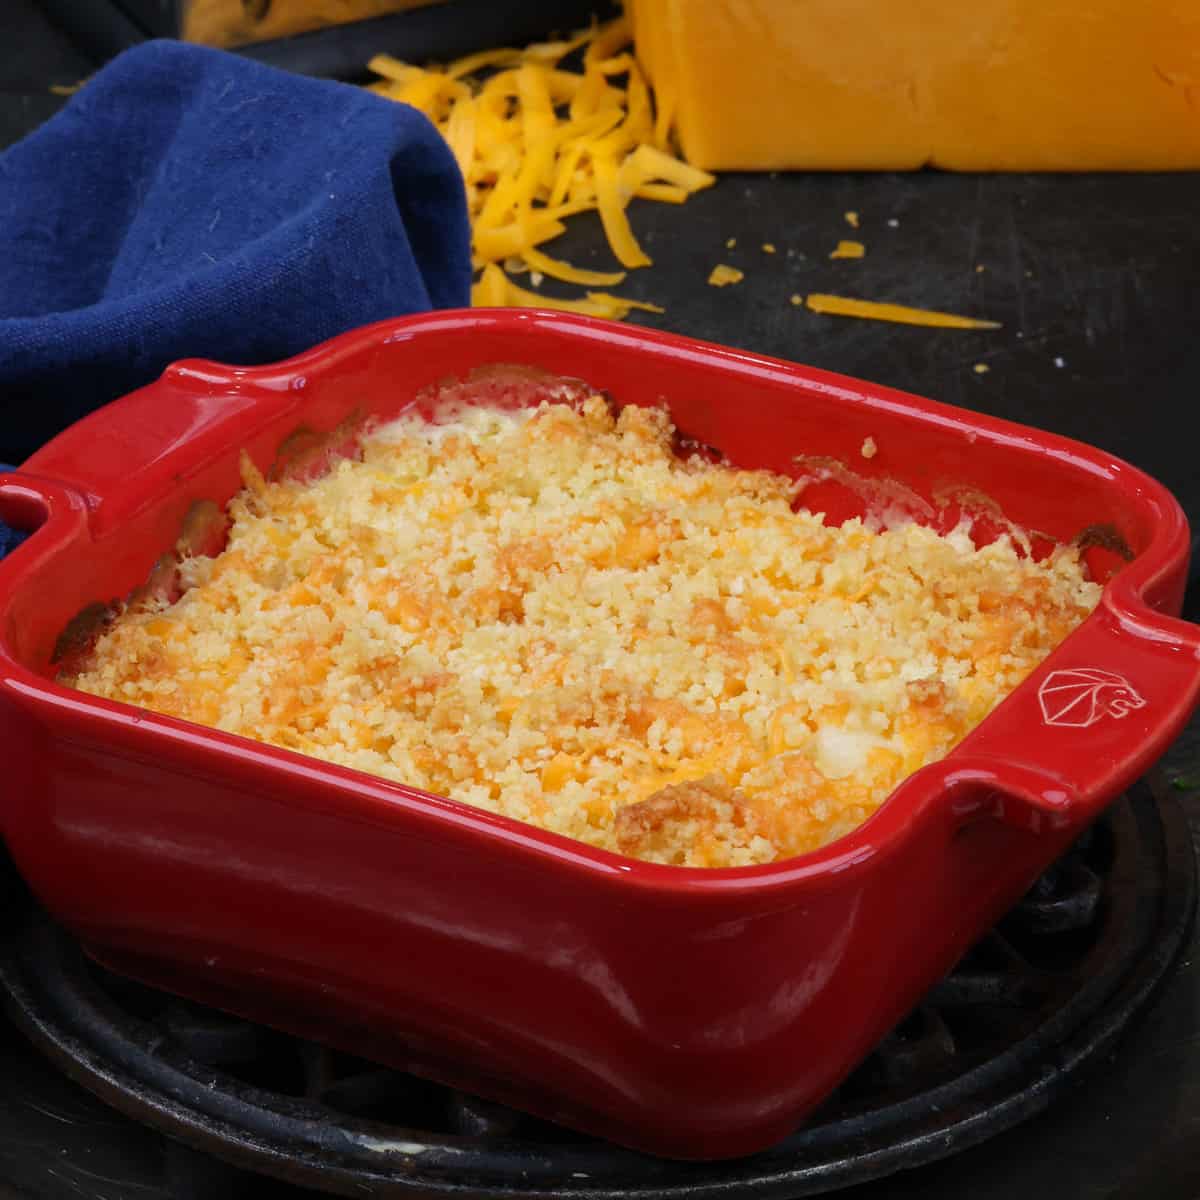 funeral potatoes in a small red baking dish next to a blue napkin.